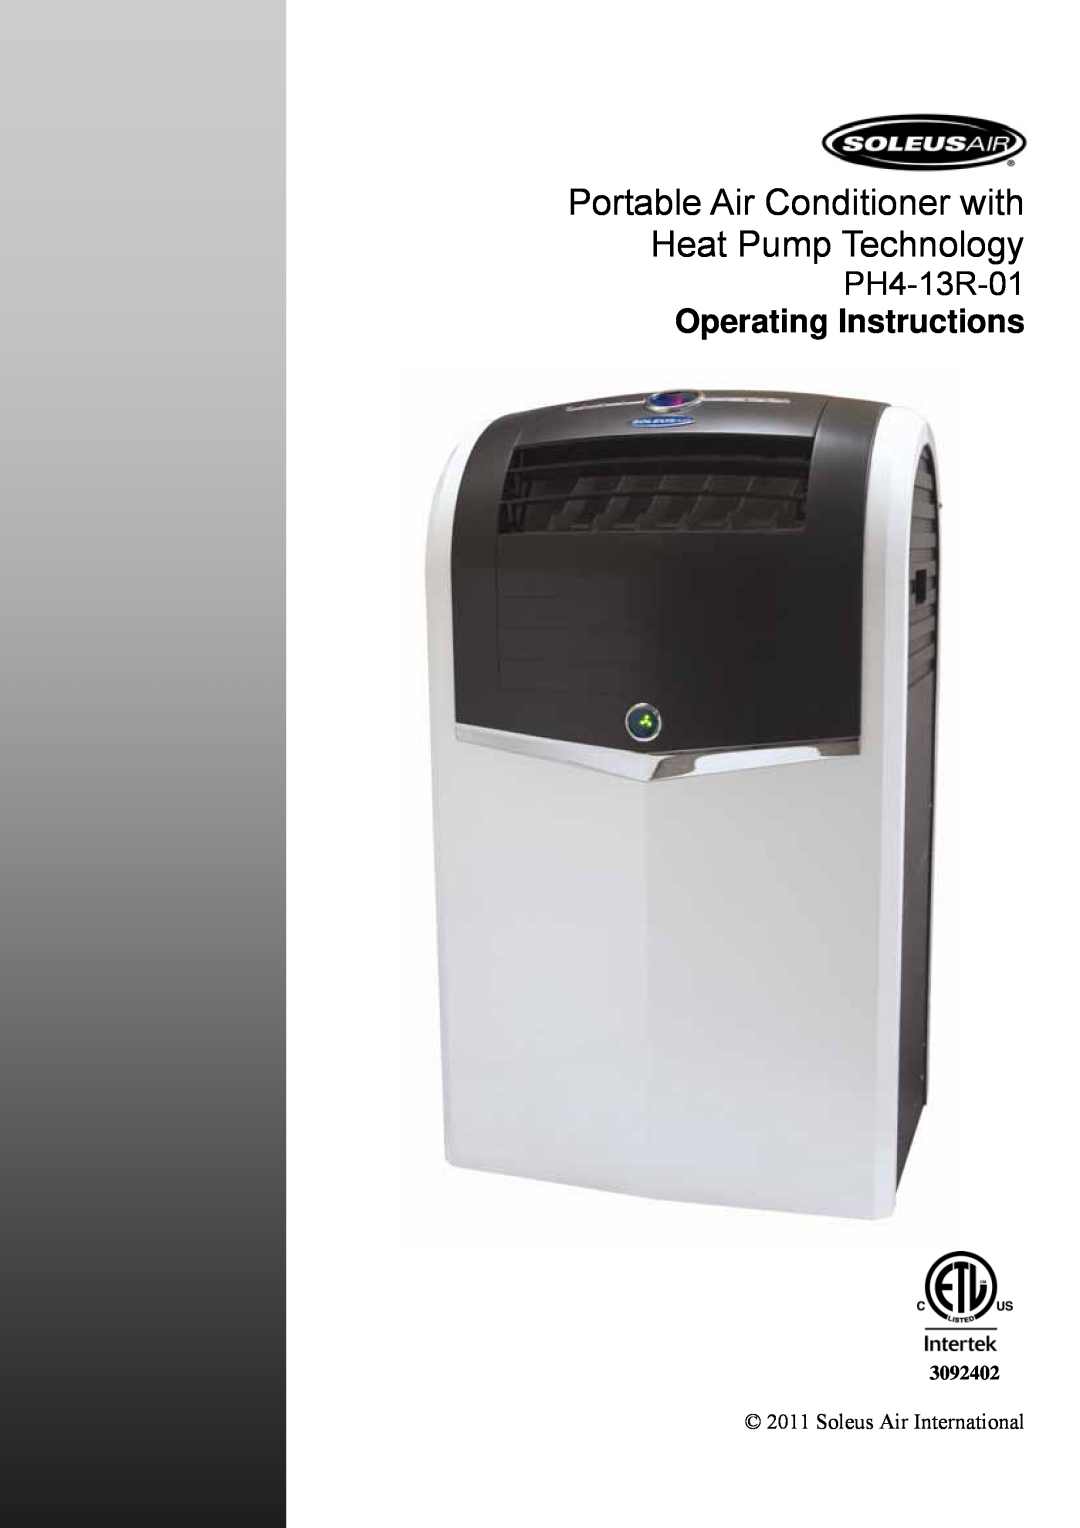 Soleus Air manual Model No. PH4-13R-01, Reference No. LX-135DHP, Portable Air Conditioner with, Heat Pump Technology 